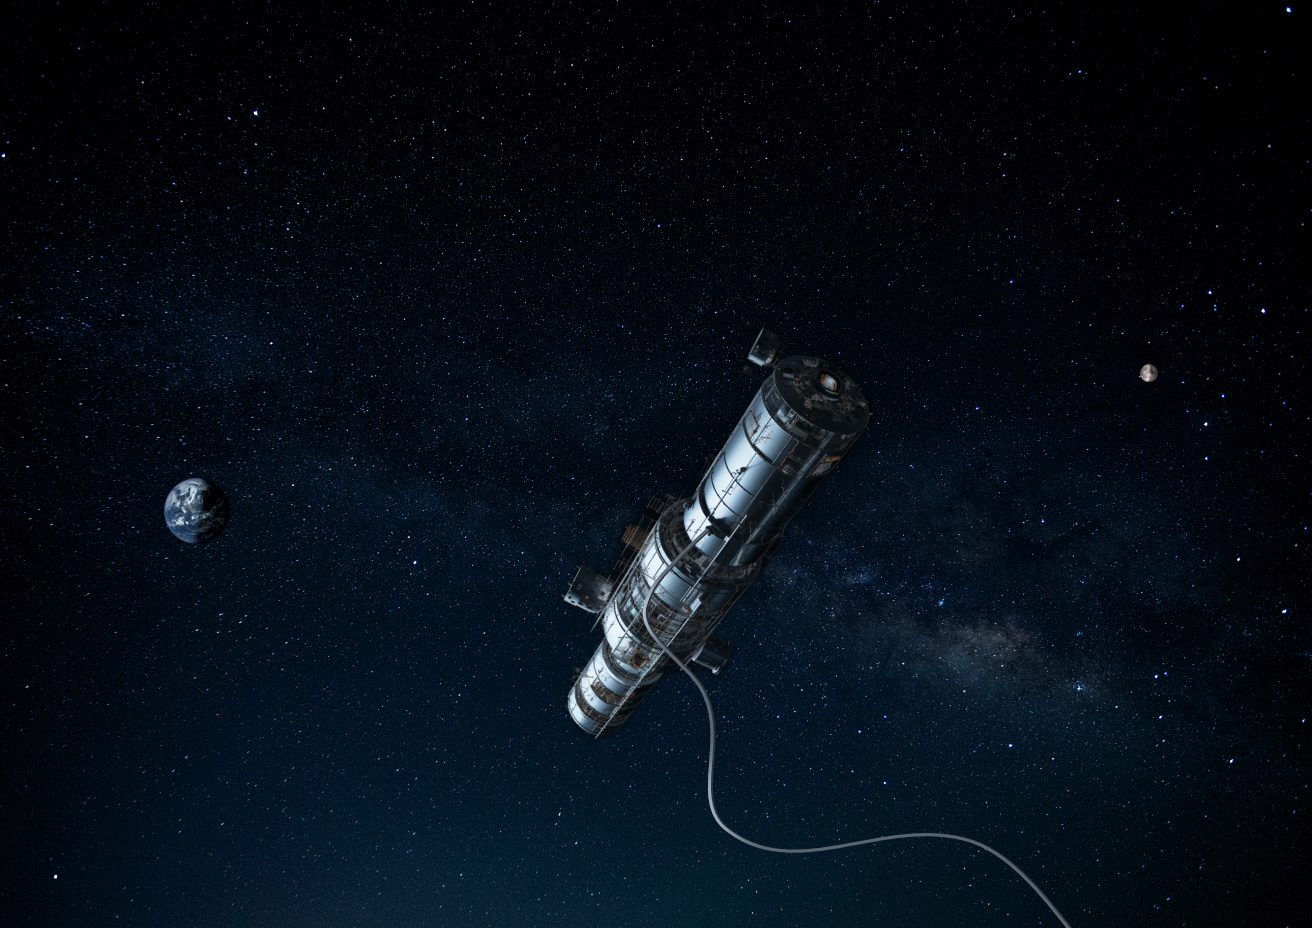 A cylindrical station in space with a single cable going to it and the earth and moon far in the distance